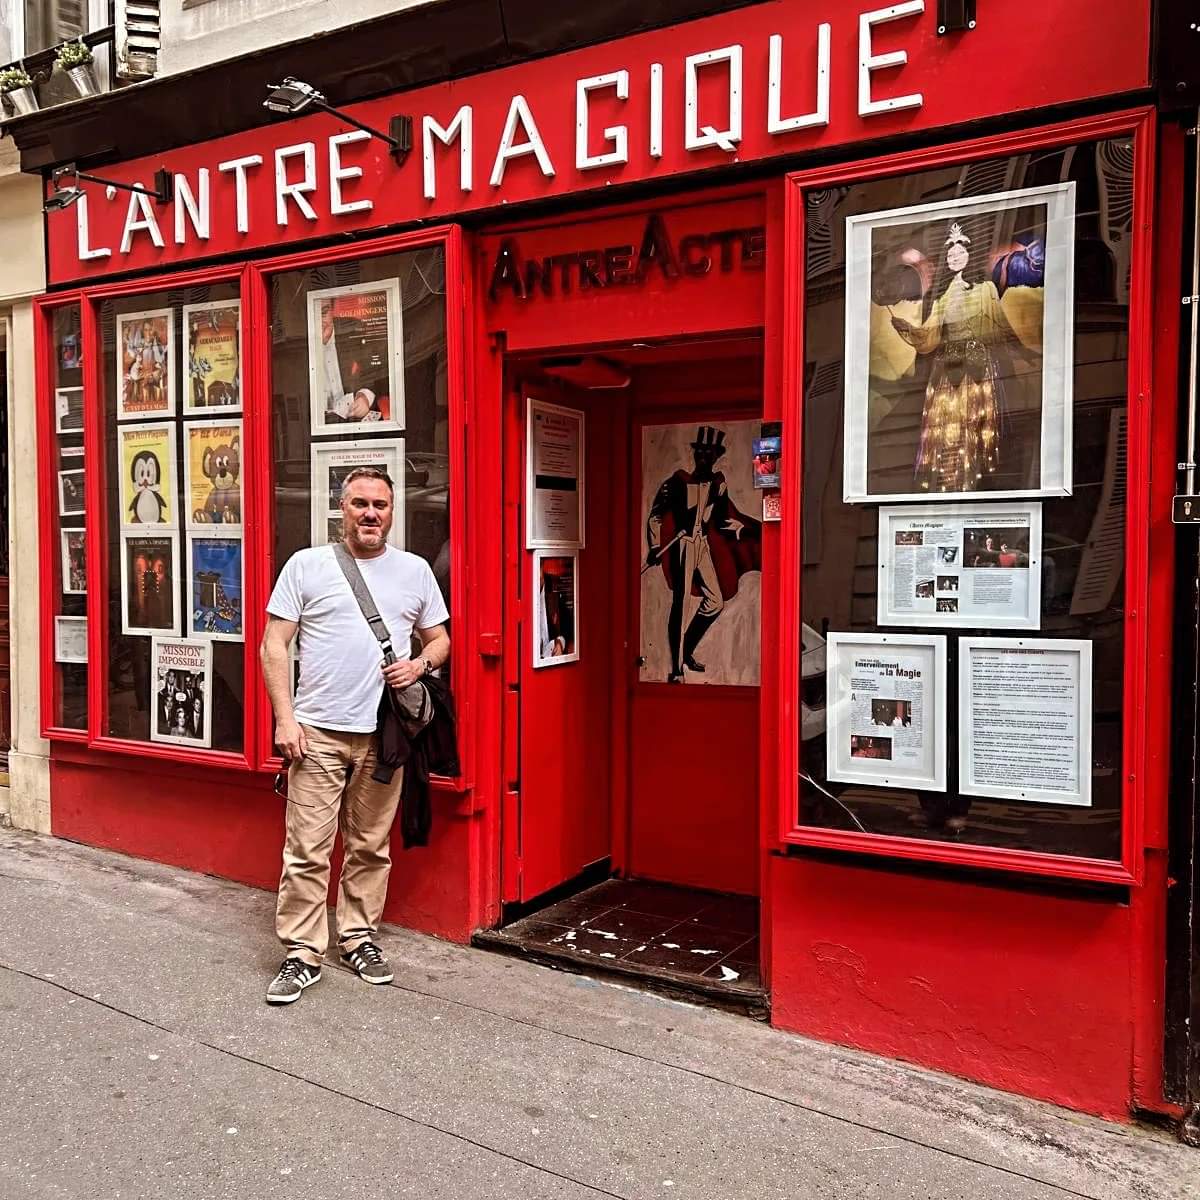 Turned down a street in Paris yesterday & found a small magic theatre! Just a few tickets left for Saturday's comedy magic & mind-reading show 'CHARLATAN' Book now thesmallspace.co.uk/whats-on #theatre #magic #comedy #liveentertainment #Barry #cardiff #whatsoncardiff #supportlocal